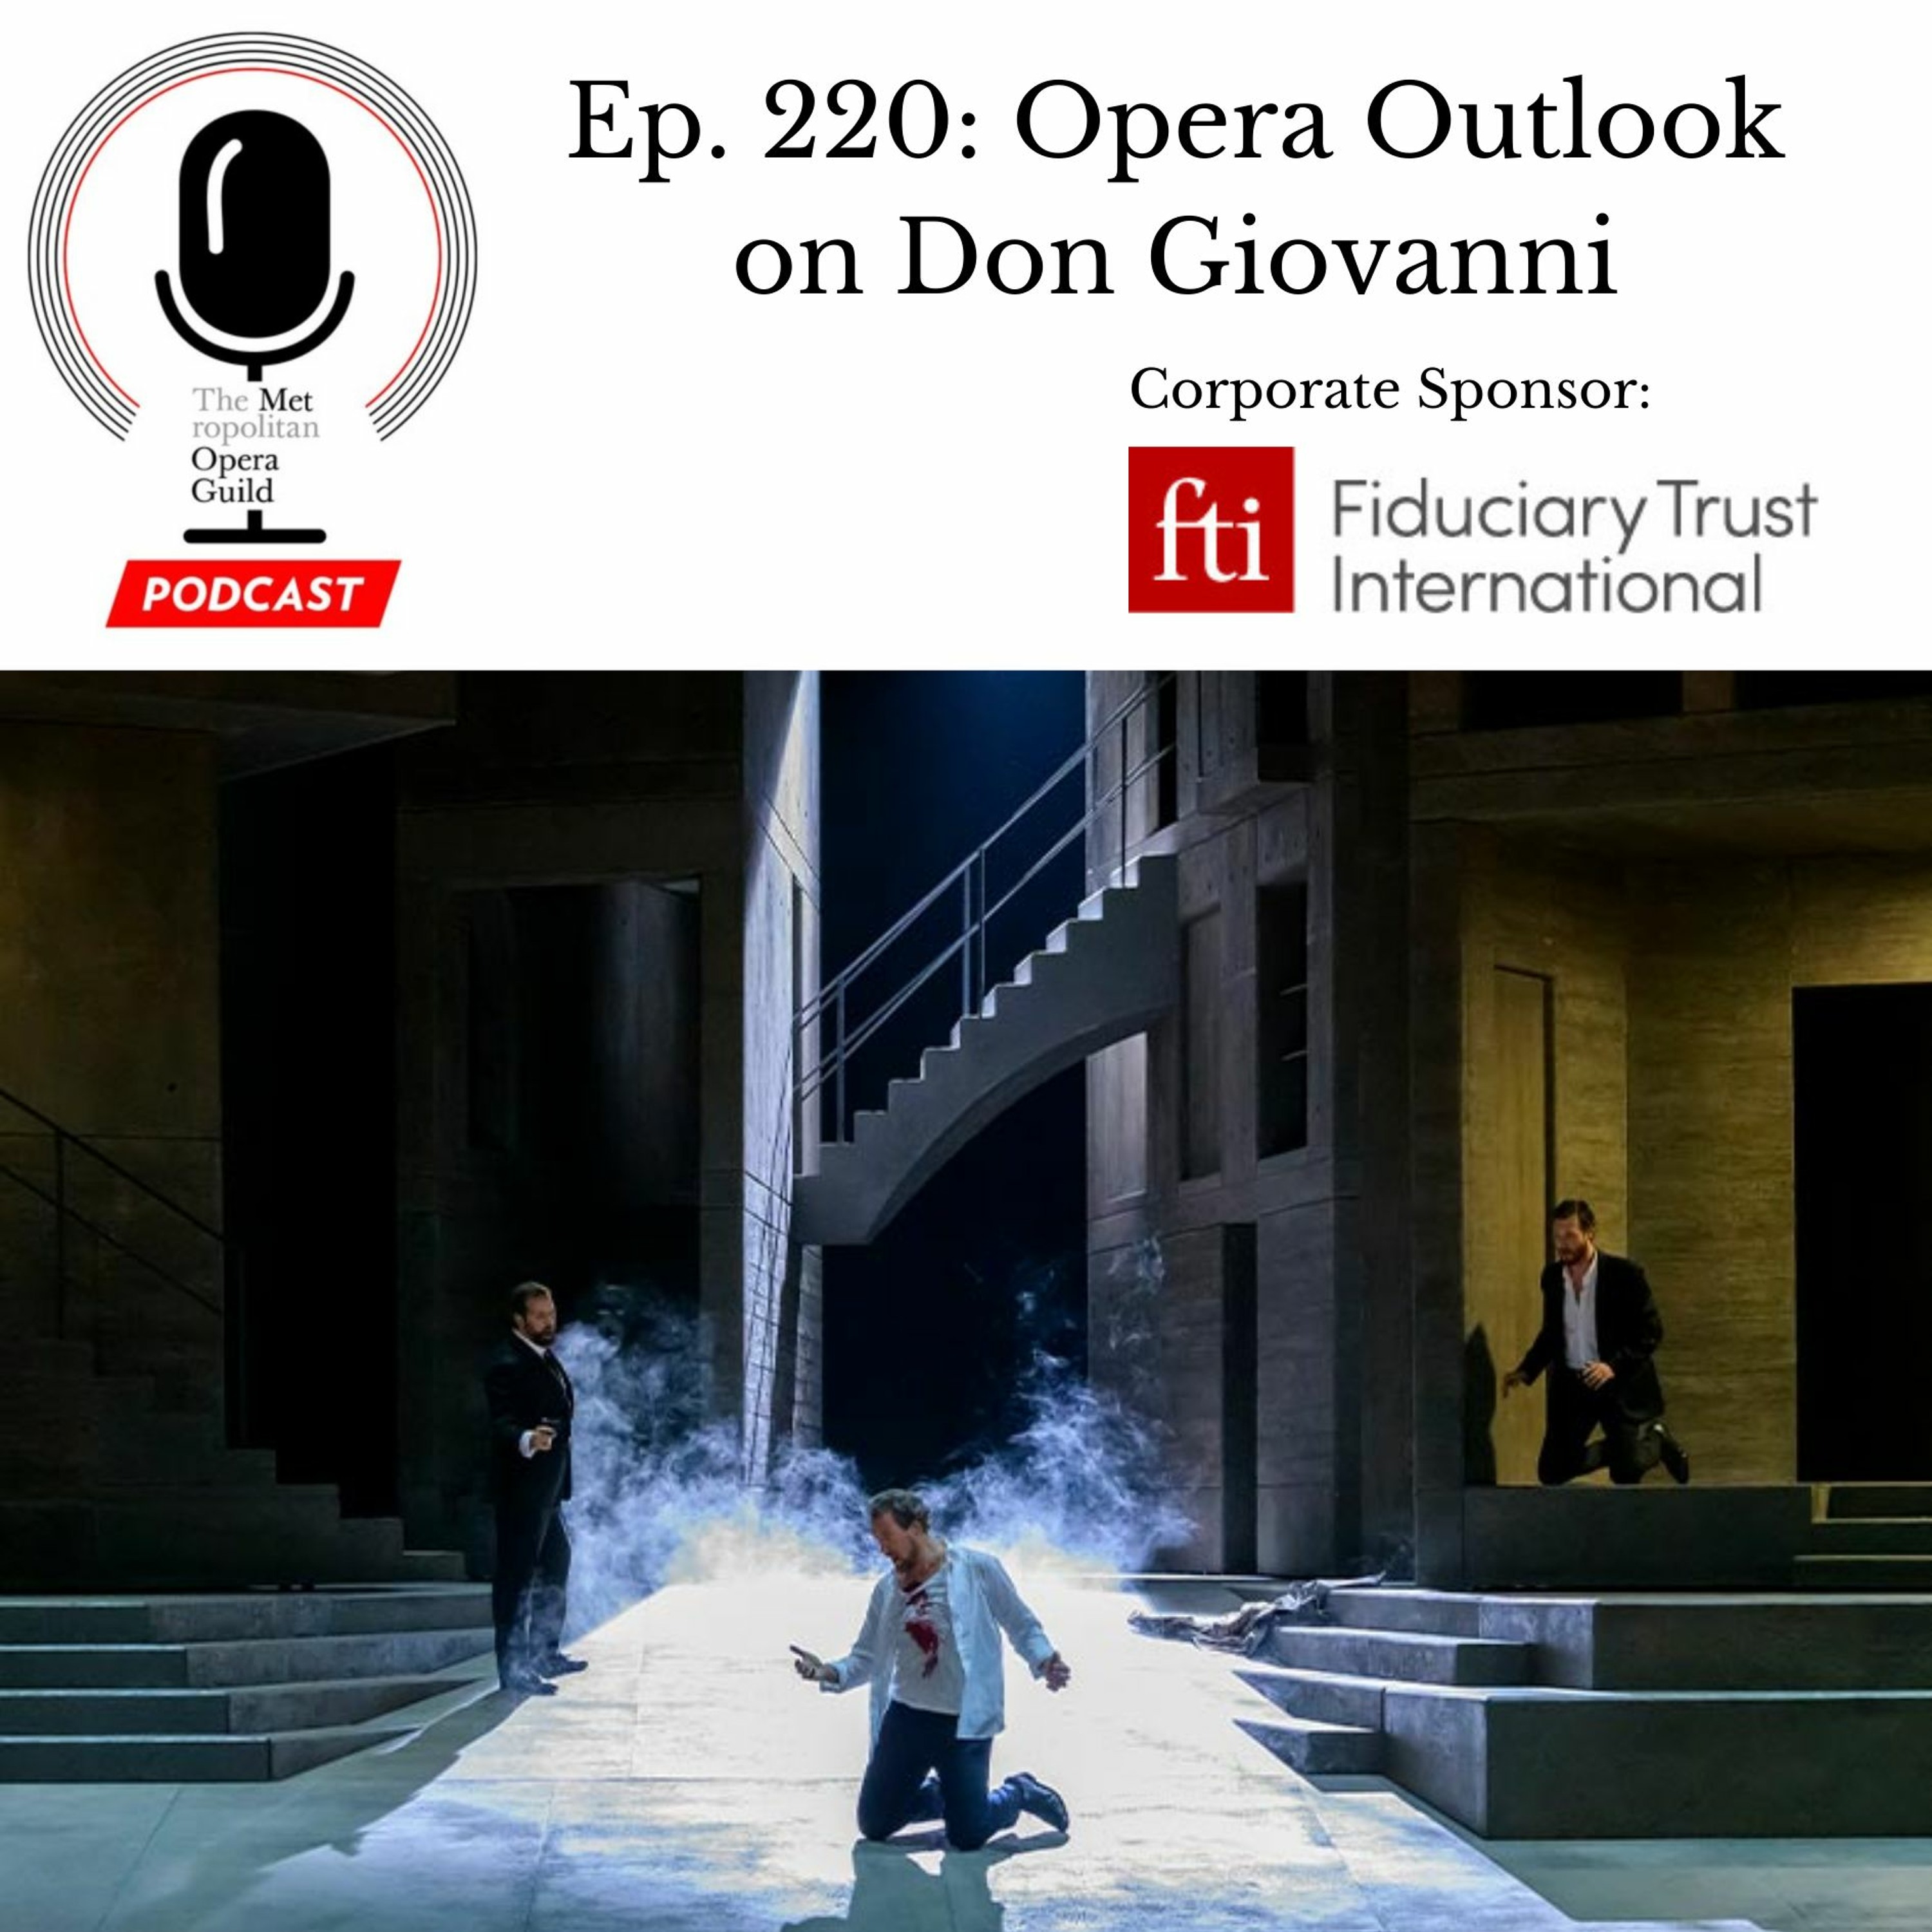 Ep. 220: Opera Outlook on Don Giovanni